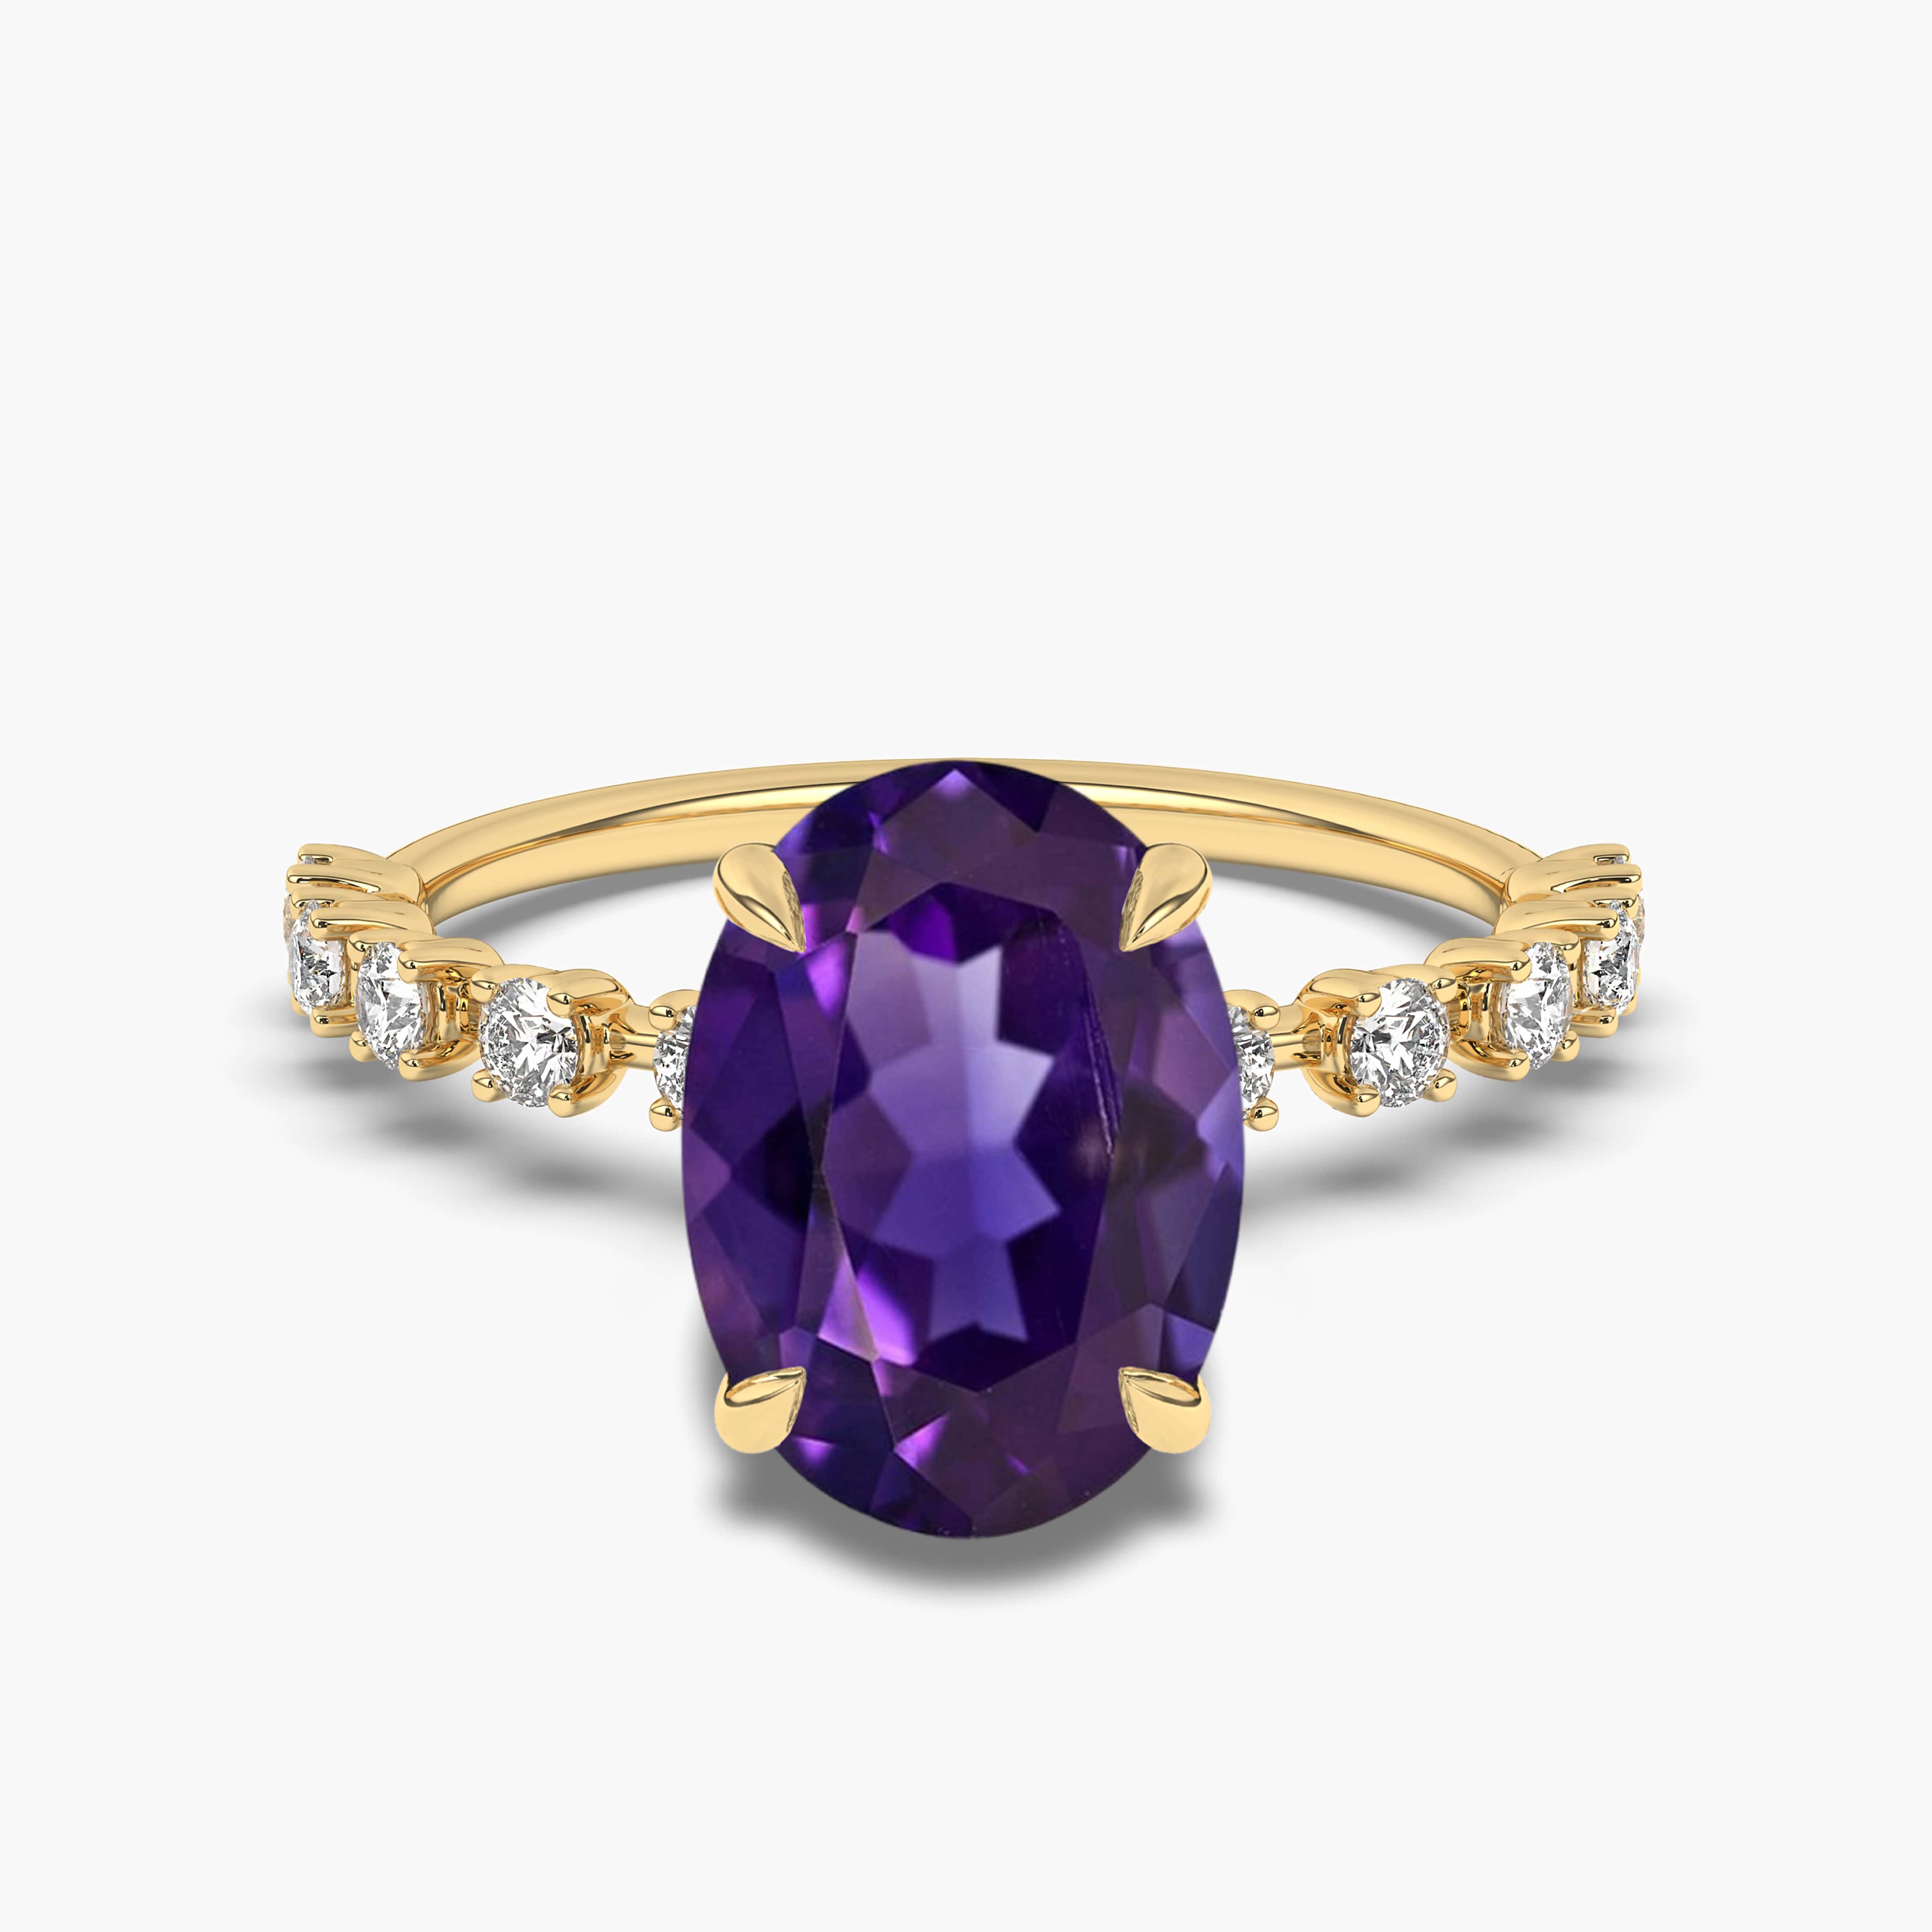 OVAL AMETHYST RING ACCENTS YELLOW GOLD